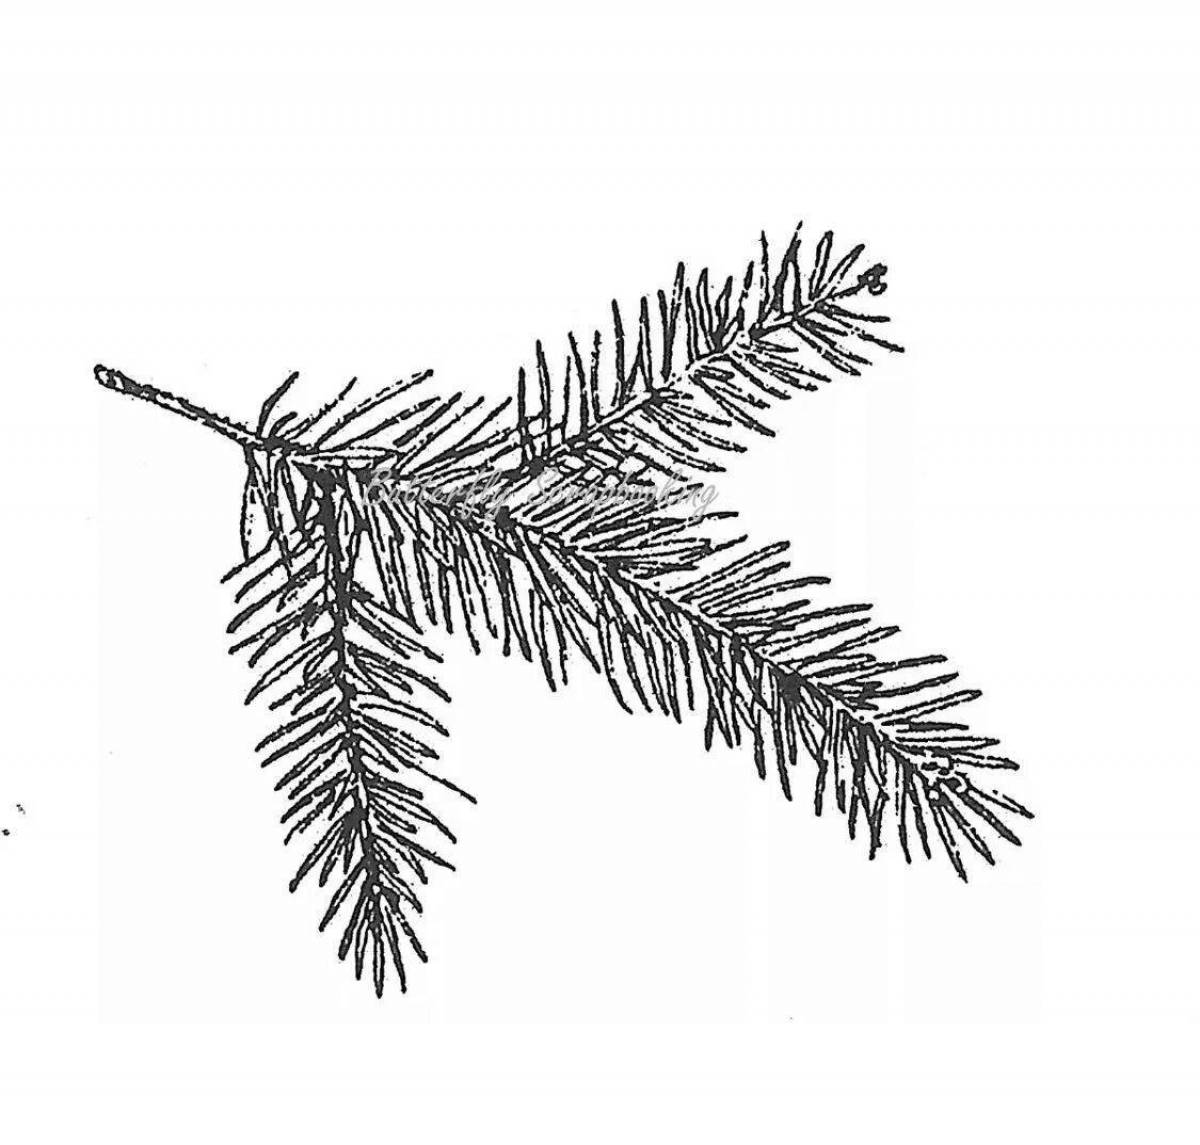 Rampant coloring of a Christmas tree branch